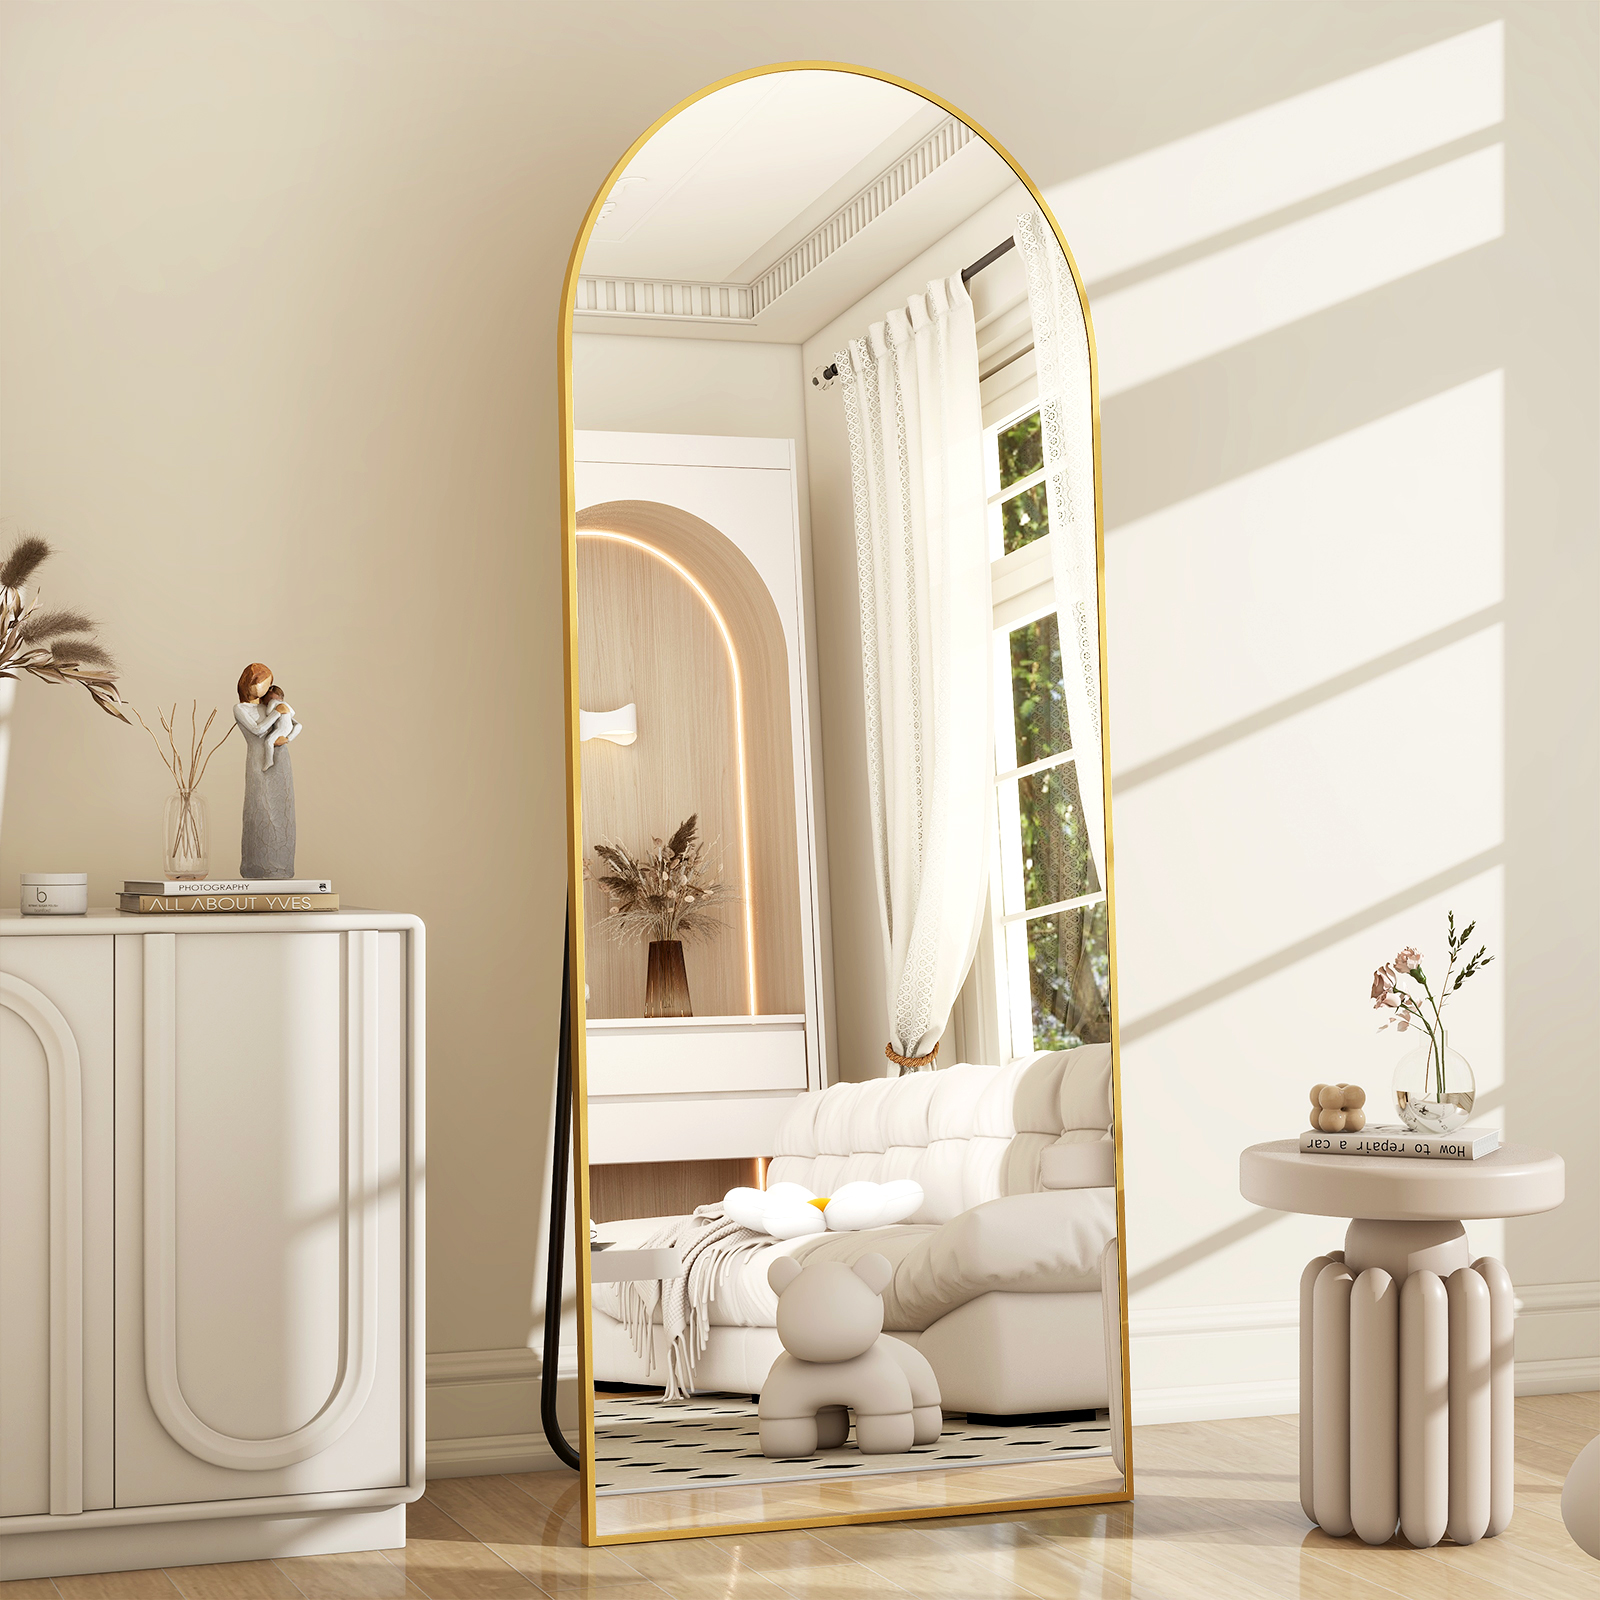 BEAUTYPEAK 64"x21" Full Length Mirror Arched Standing Floor Mirror Full Body Mirror, Gold - image 1 of 13